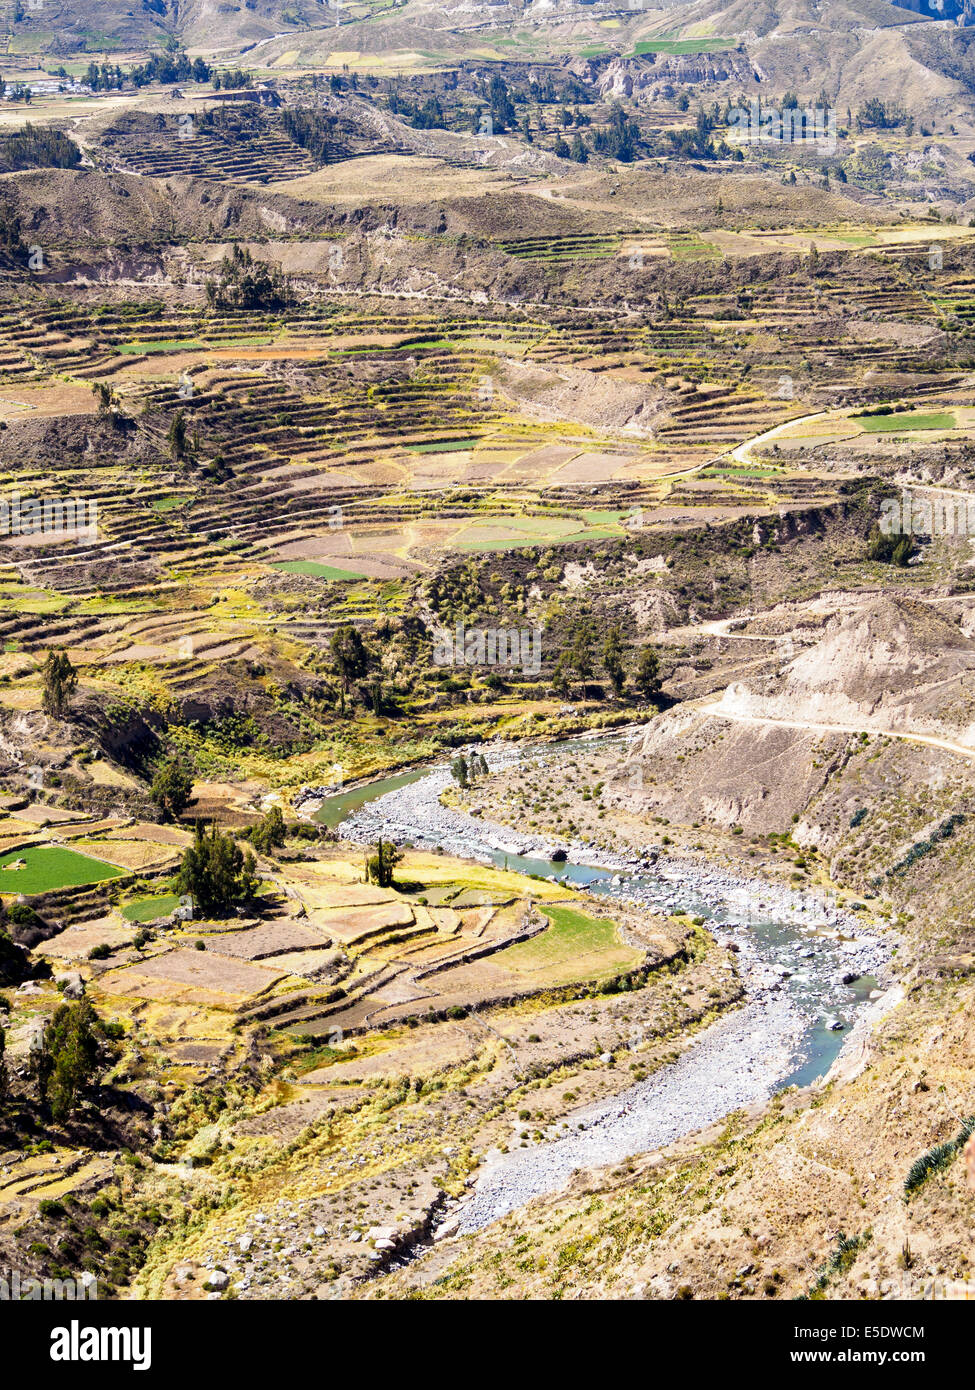 Agricoltural terraces in the Colca Canyon - Peru Stock Photo